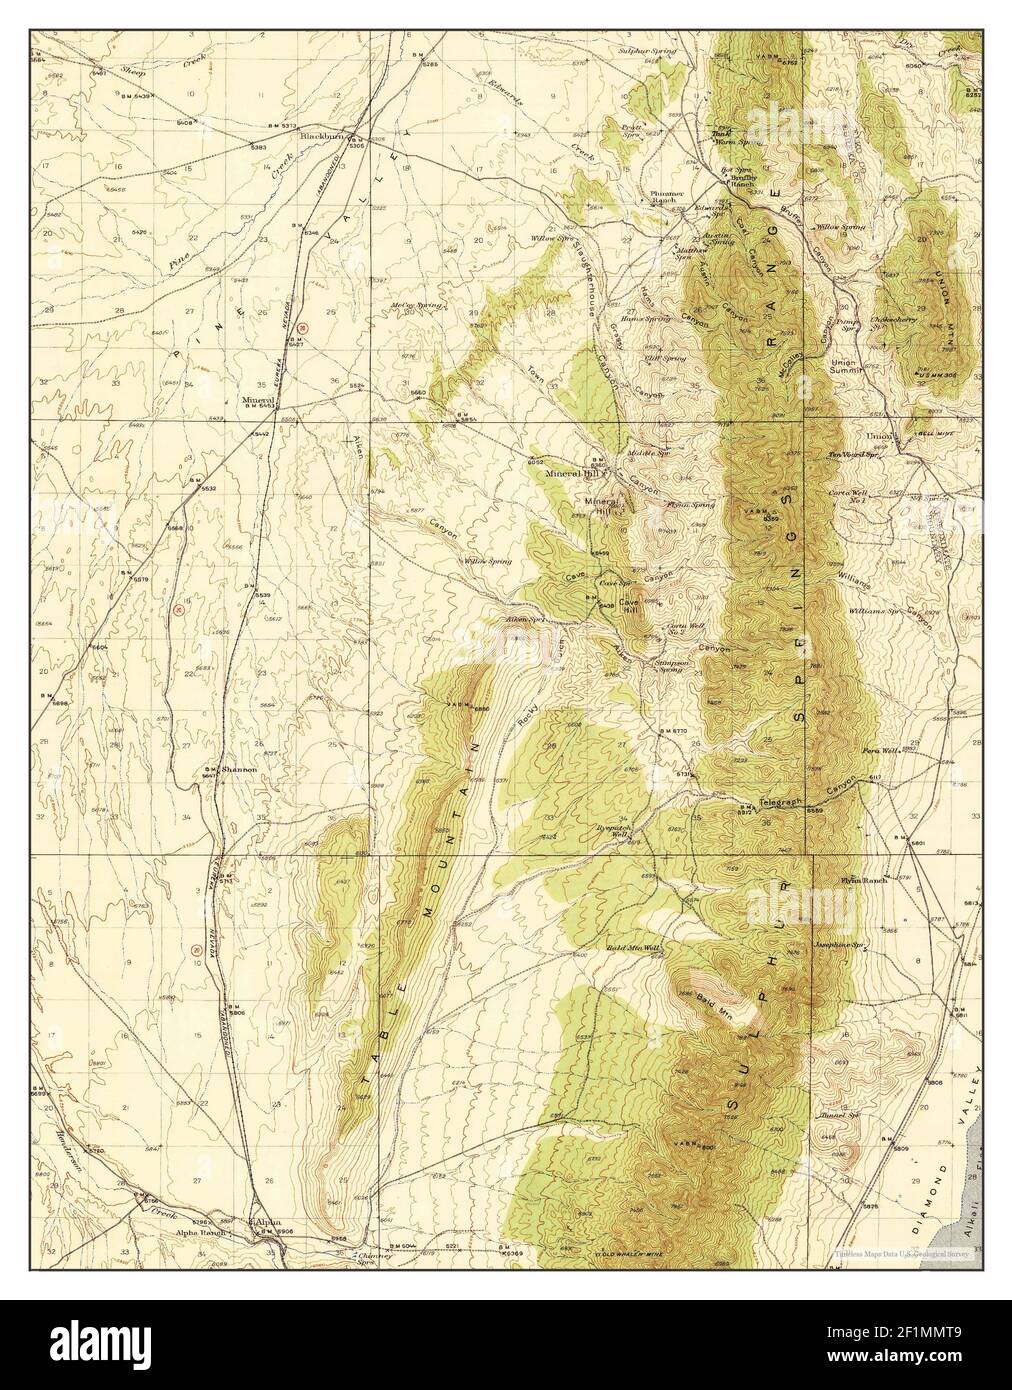 Mineral Hill, Nevada, map 1943, 1:62500, United States of America by Timeless Maps, data U.S. Geological Survey Foto Stock